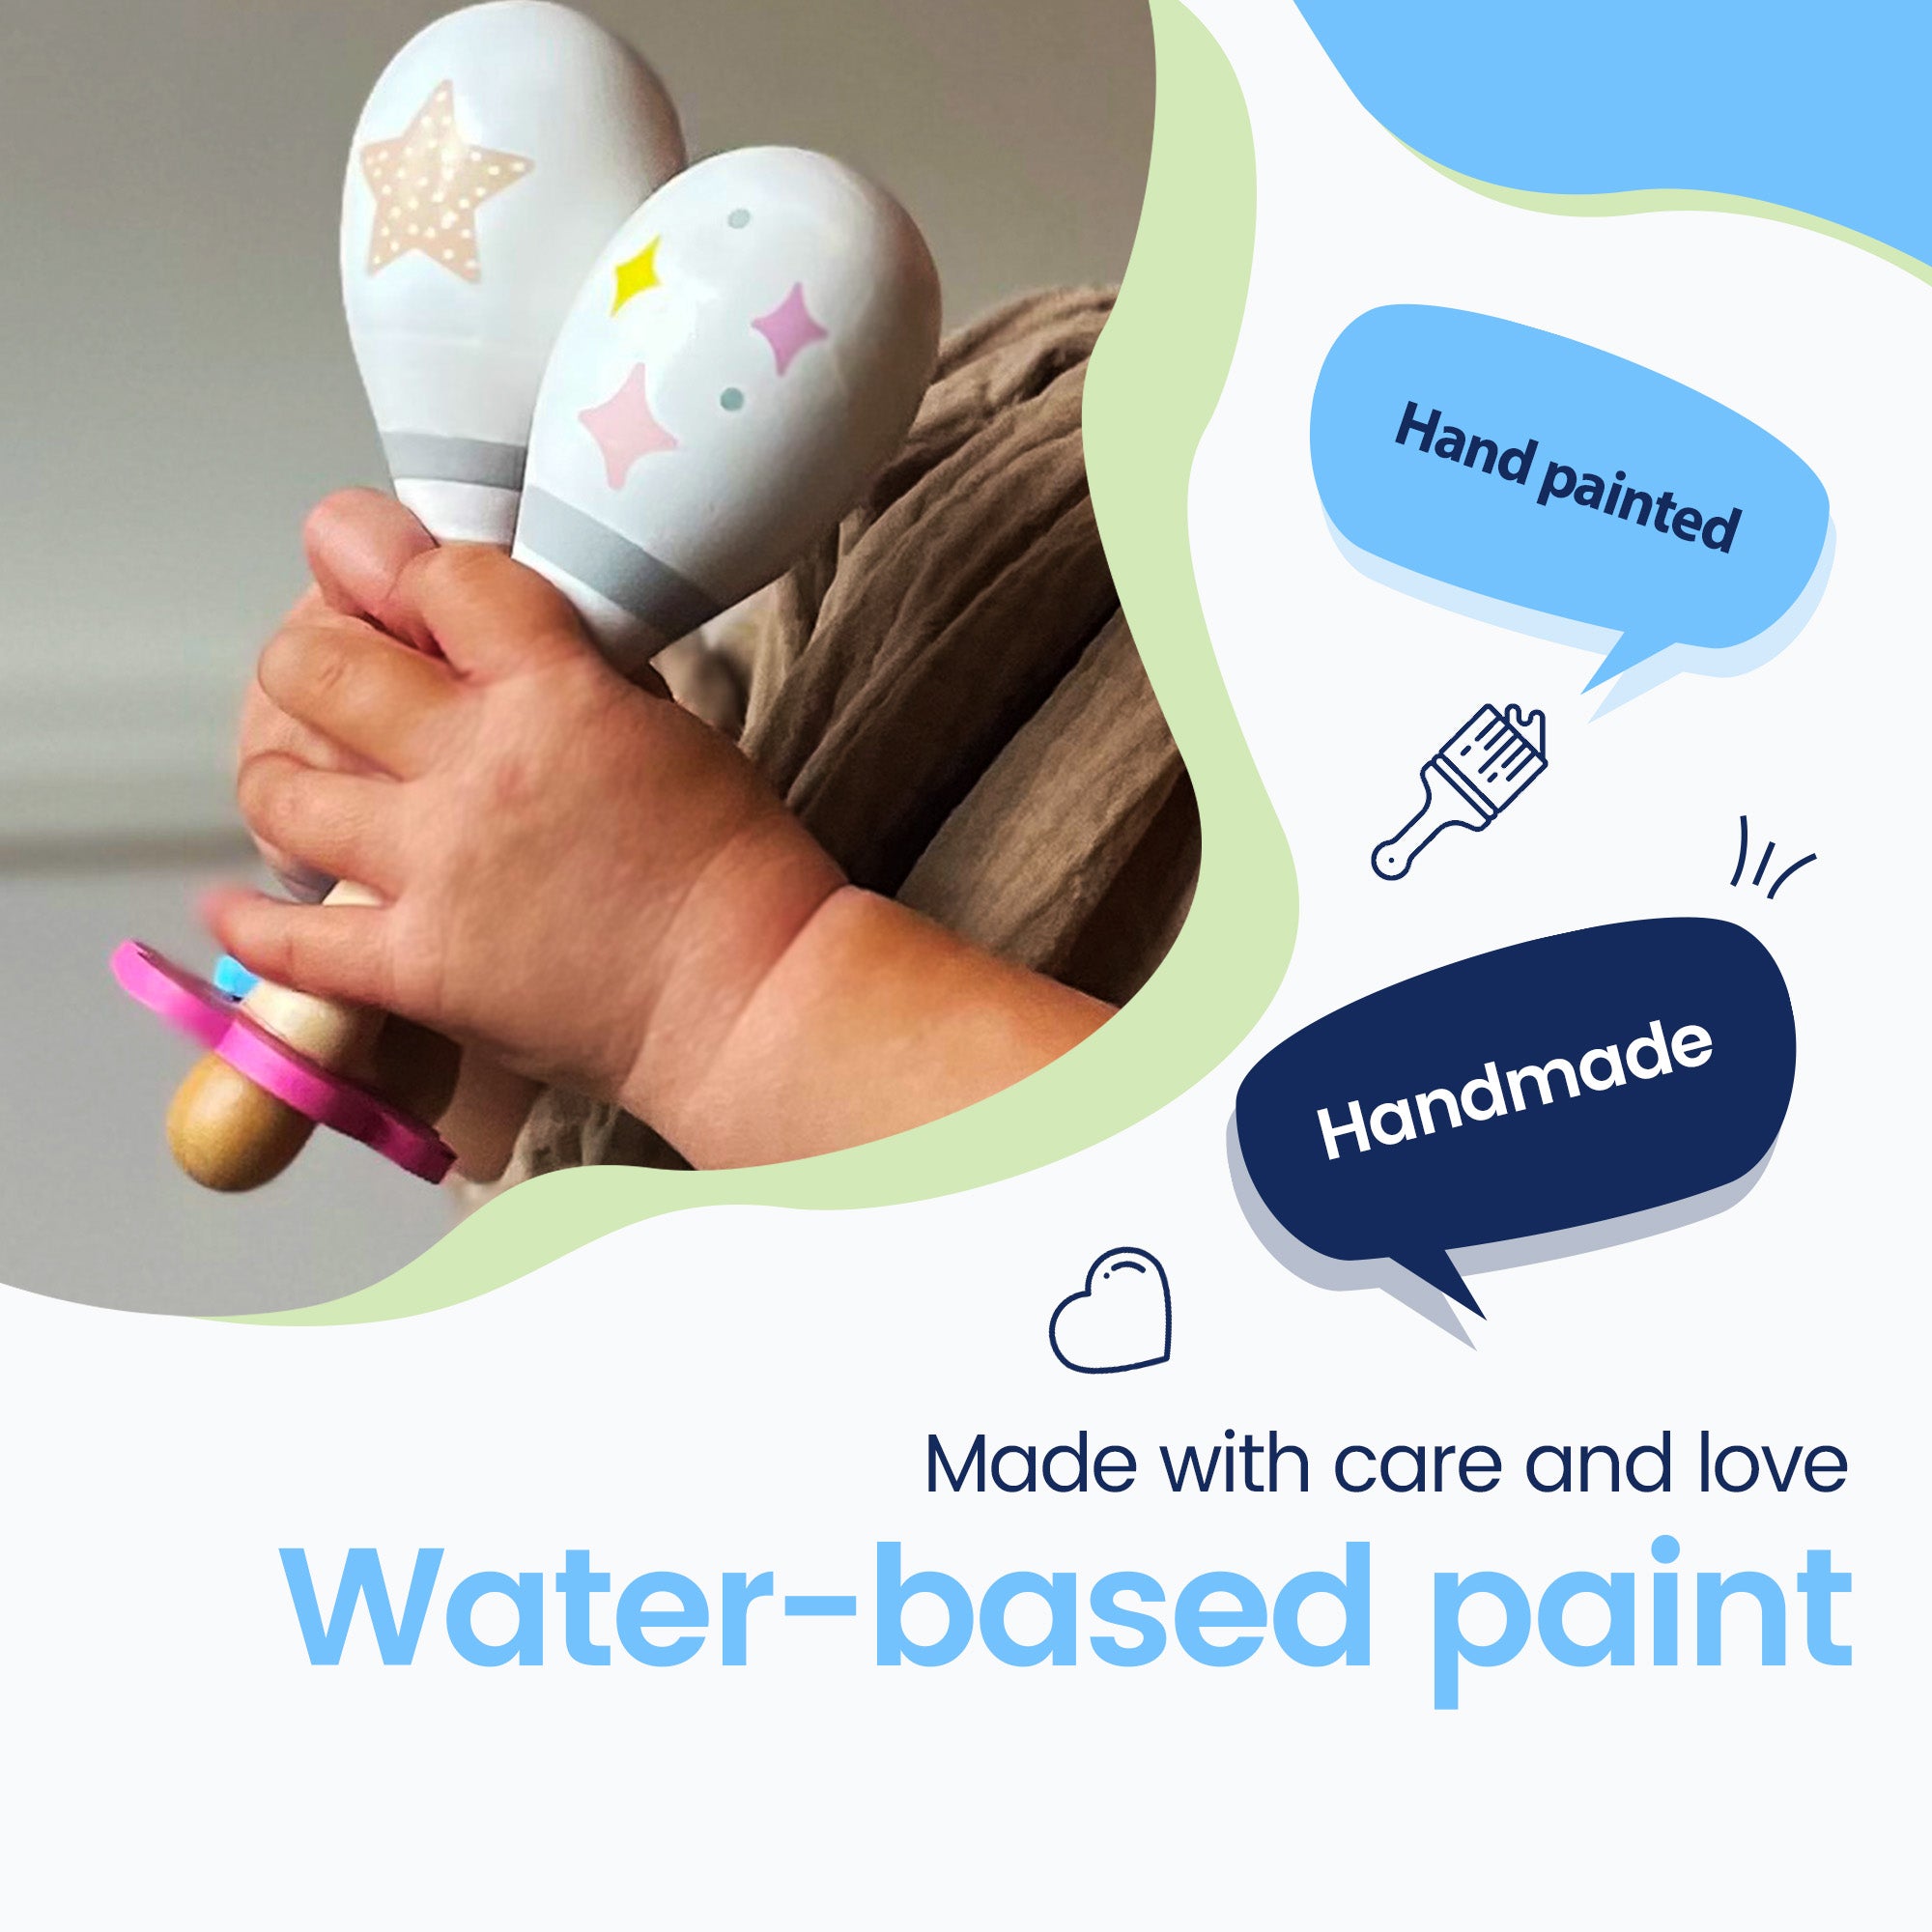 Made carefully and with love - Water-based paint - Hand-painted - Handmade